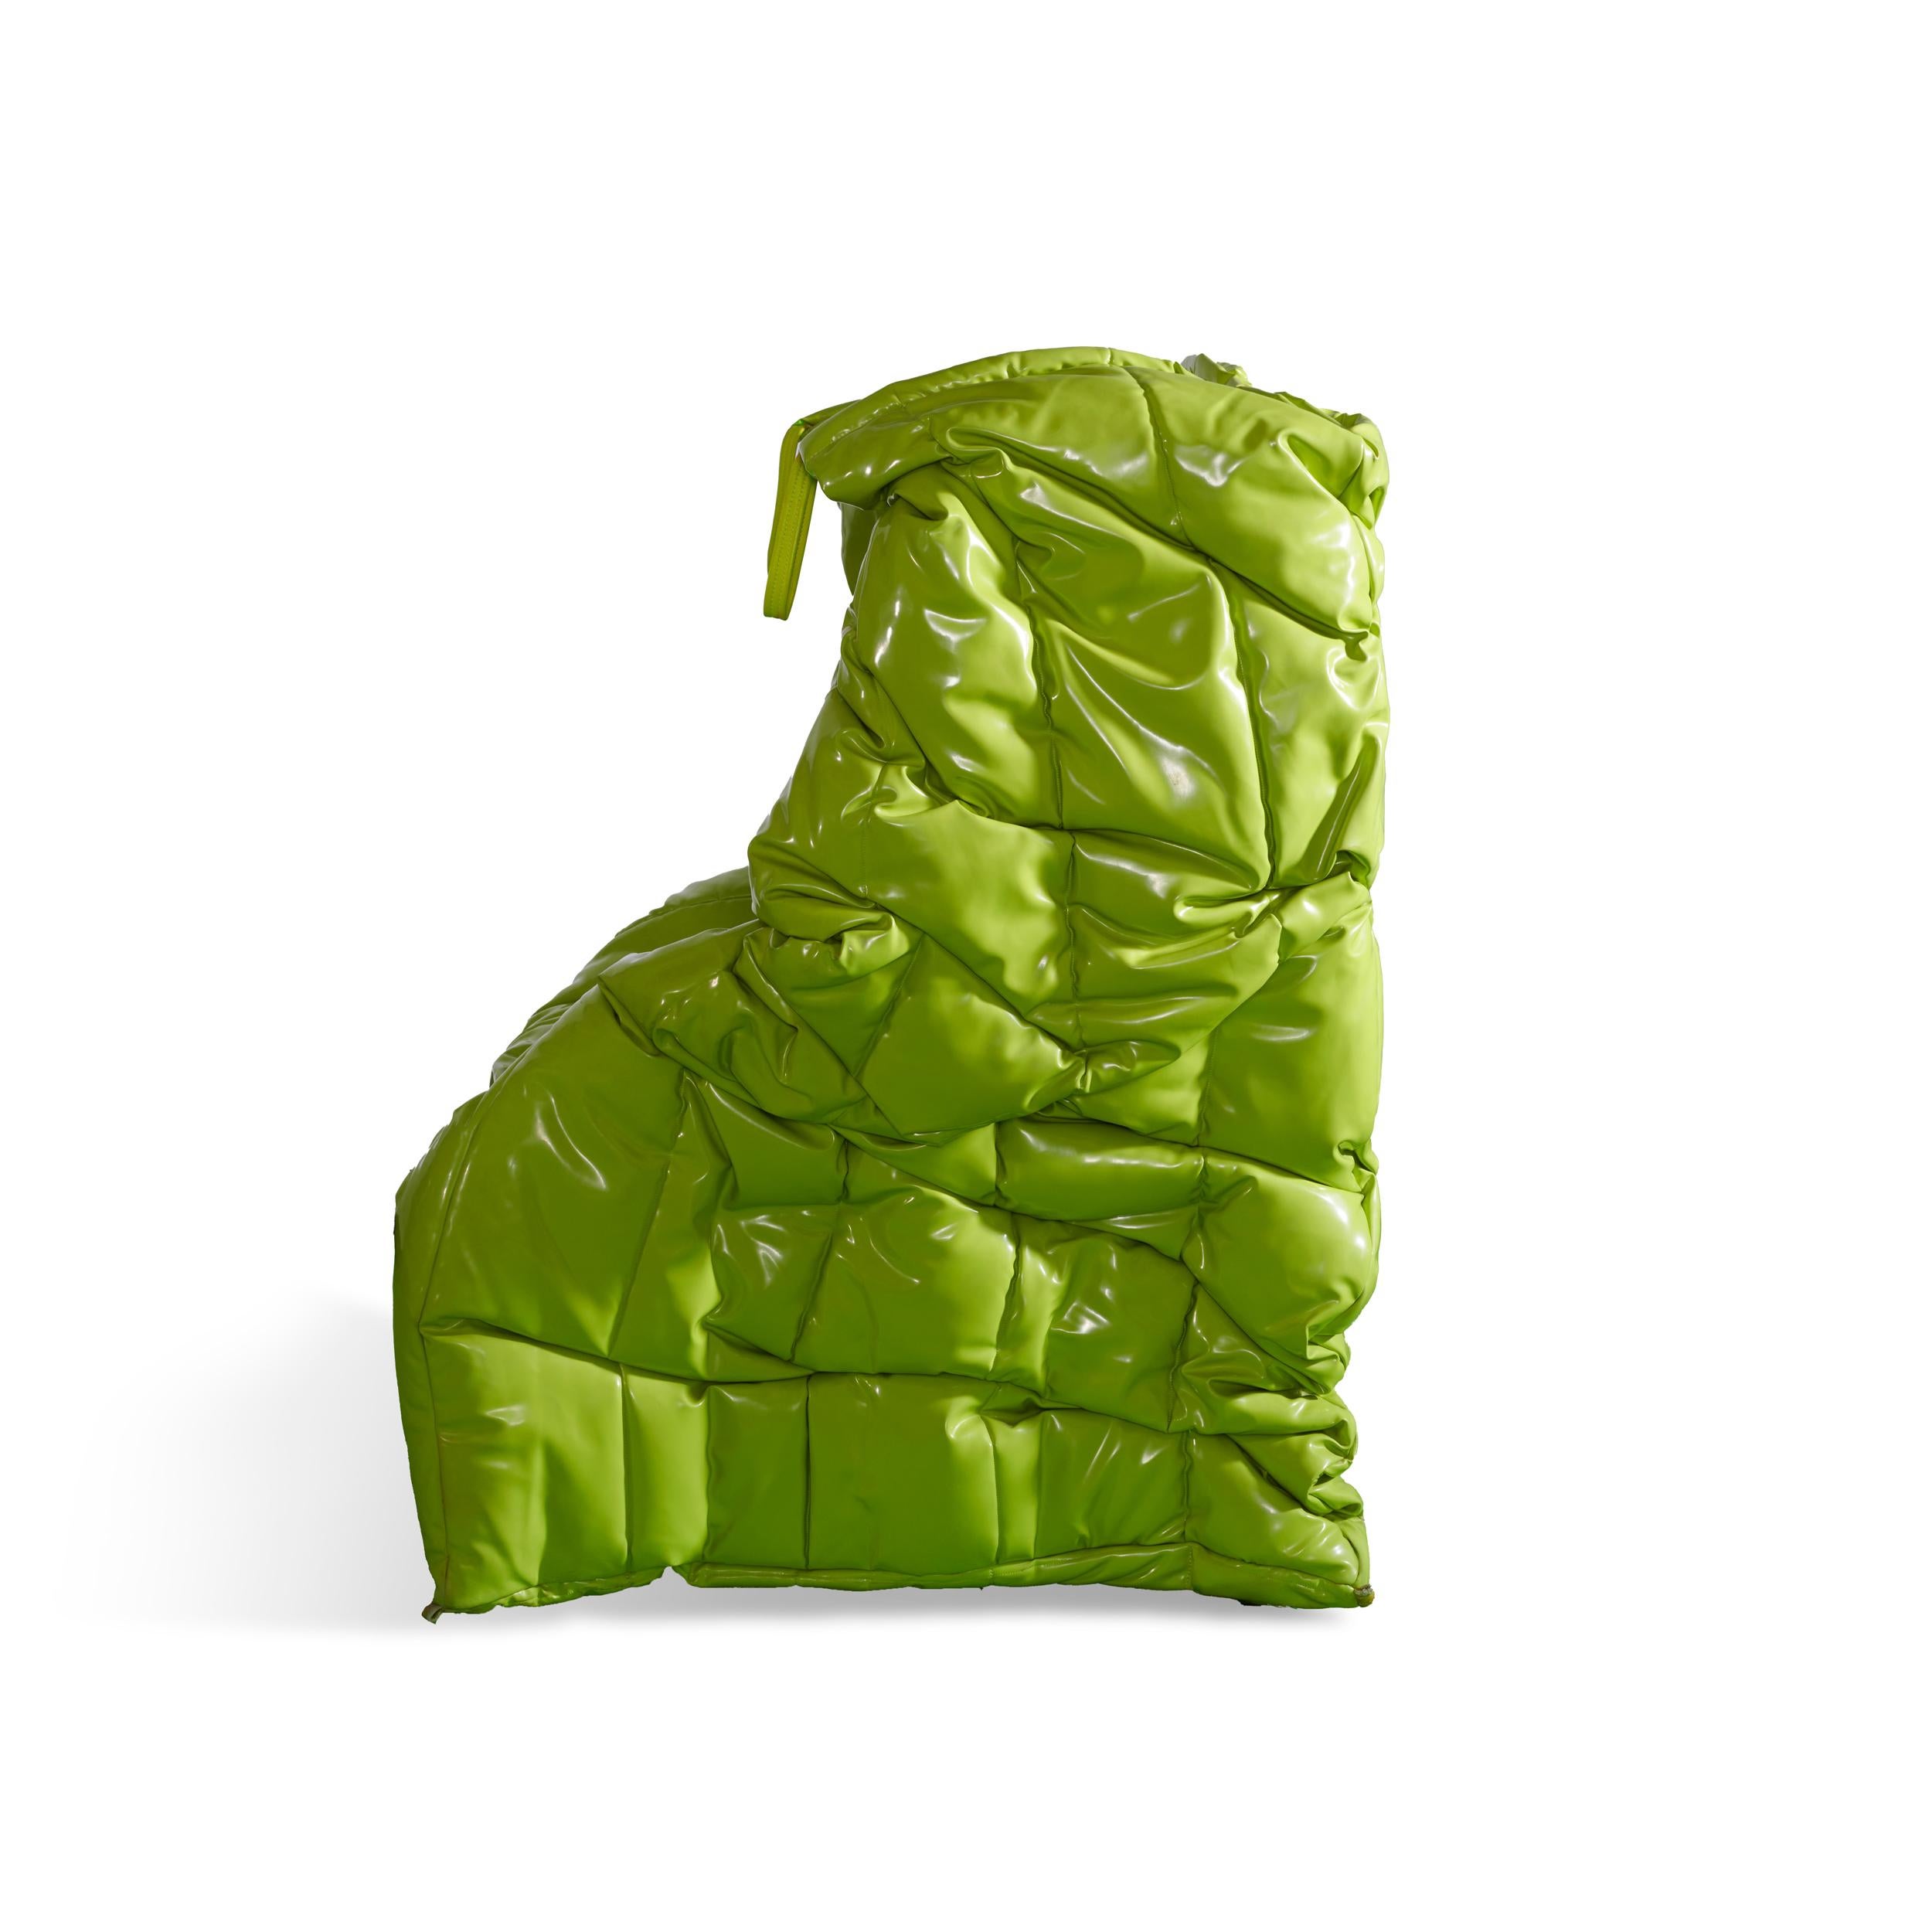 Shadow Armchair by Gaetano Pesce - Green In New Condition For Sale In La Morra, CN